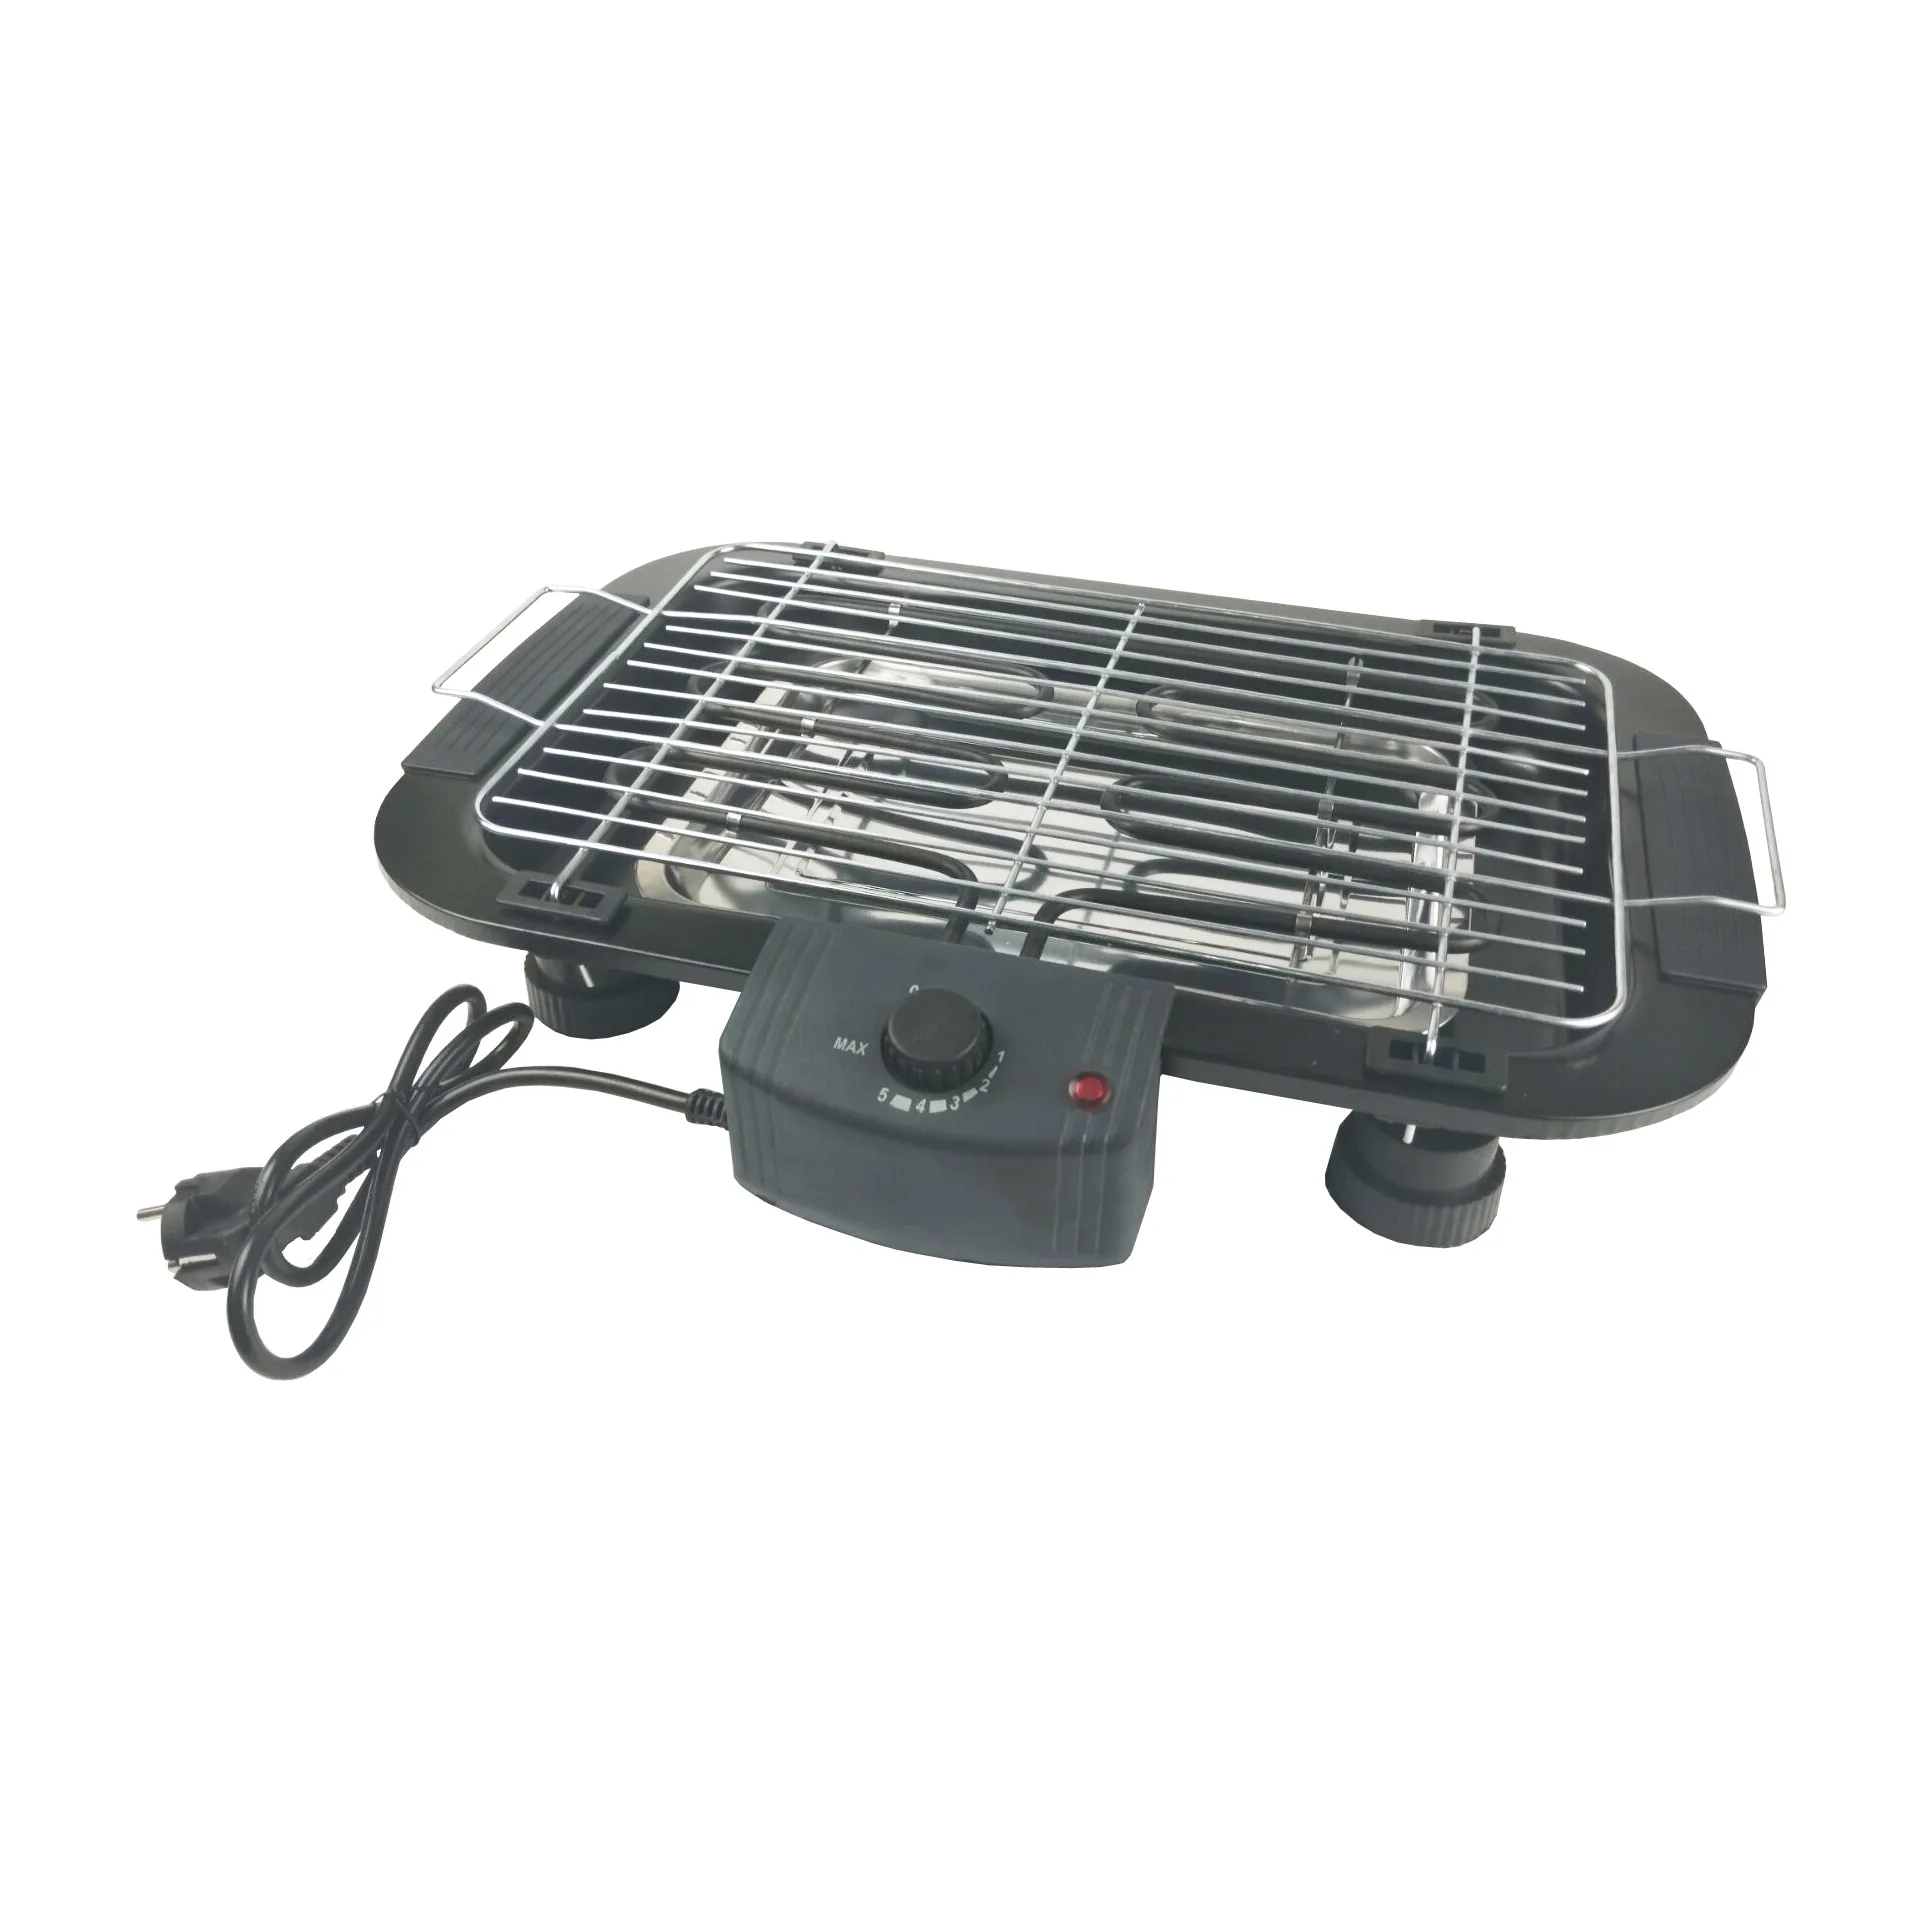 ingenieur Ongrijpbaar Kruiden Household Electric Barbecue Bbq Accessory Multi-function Electric Barbecue  Stainless Steel Bbq Grill - Buy Cast Iron Bbq Grills,Vertical Bbq Grill,Balcony  Hanging Bbq Grill Product on Alibaba.com